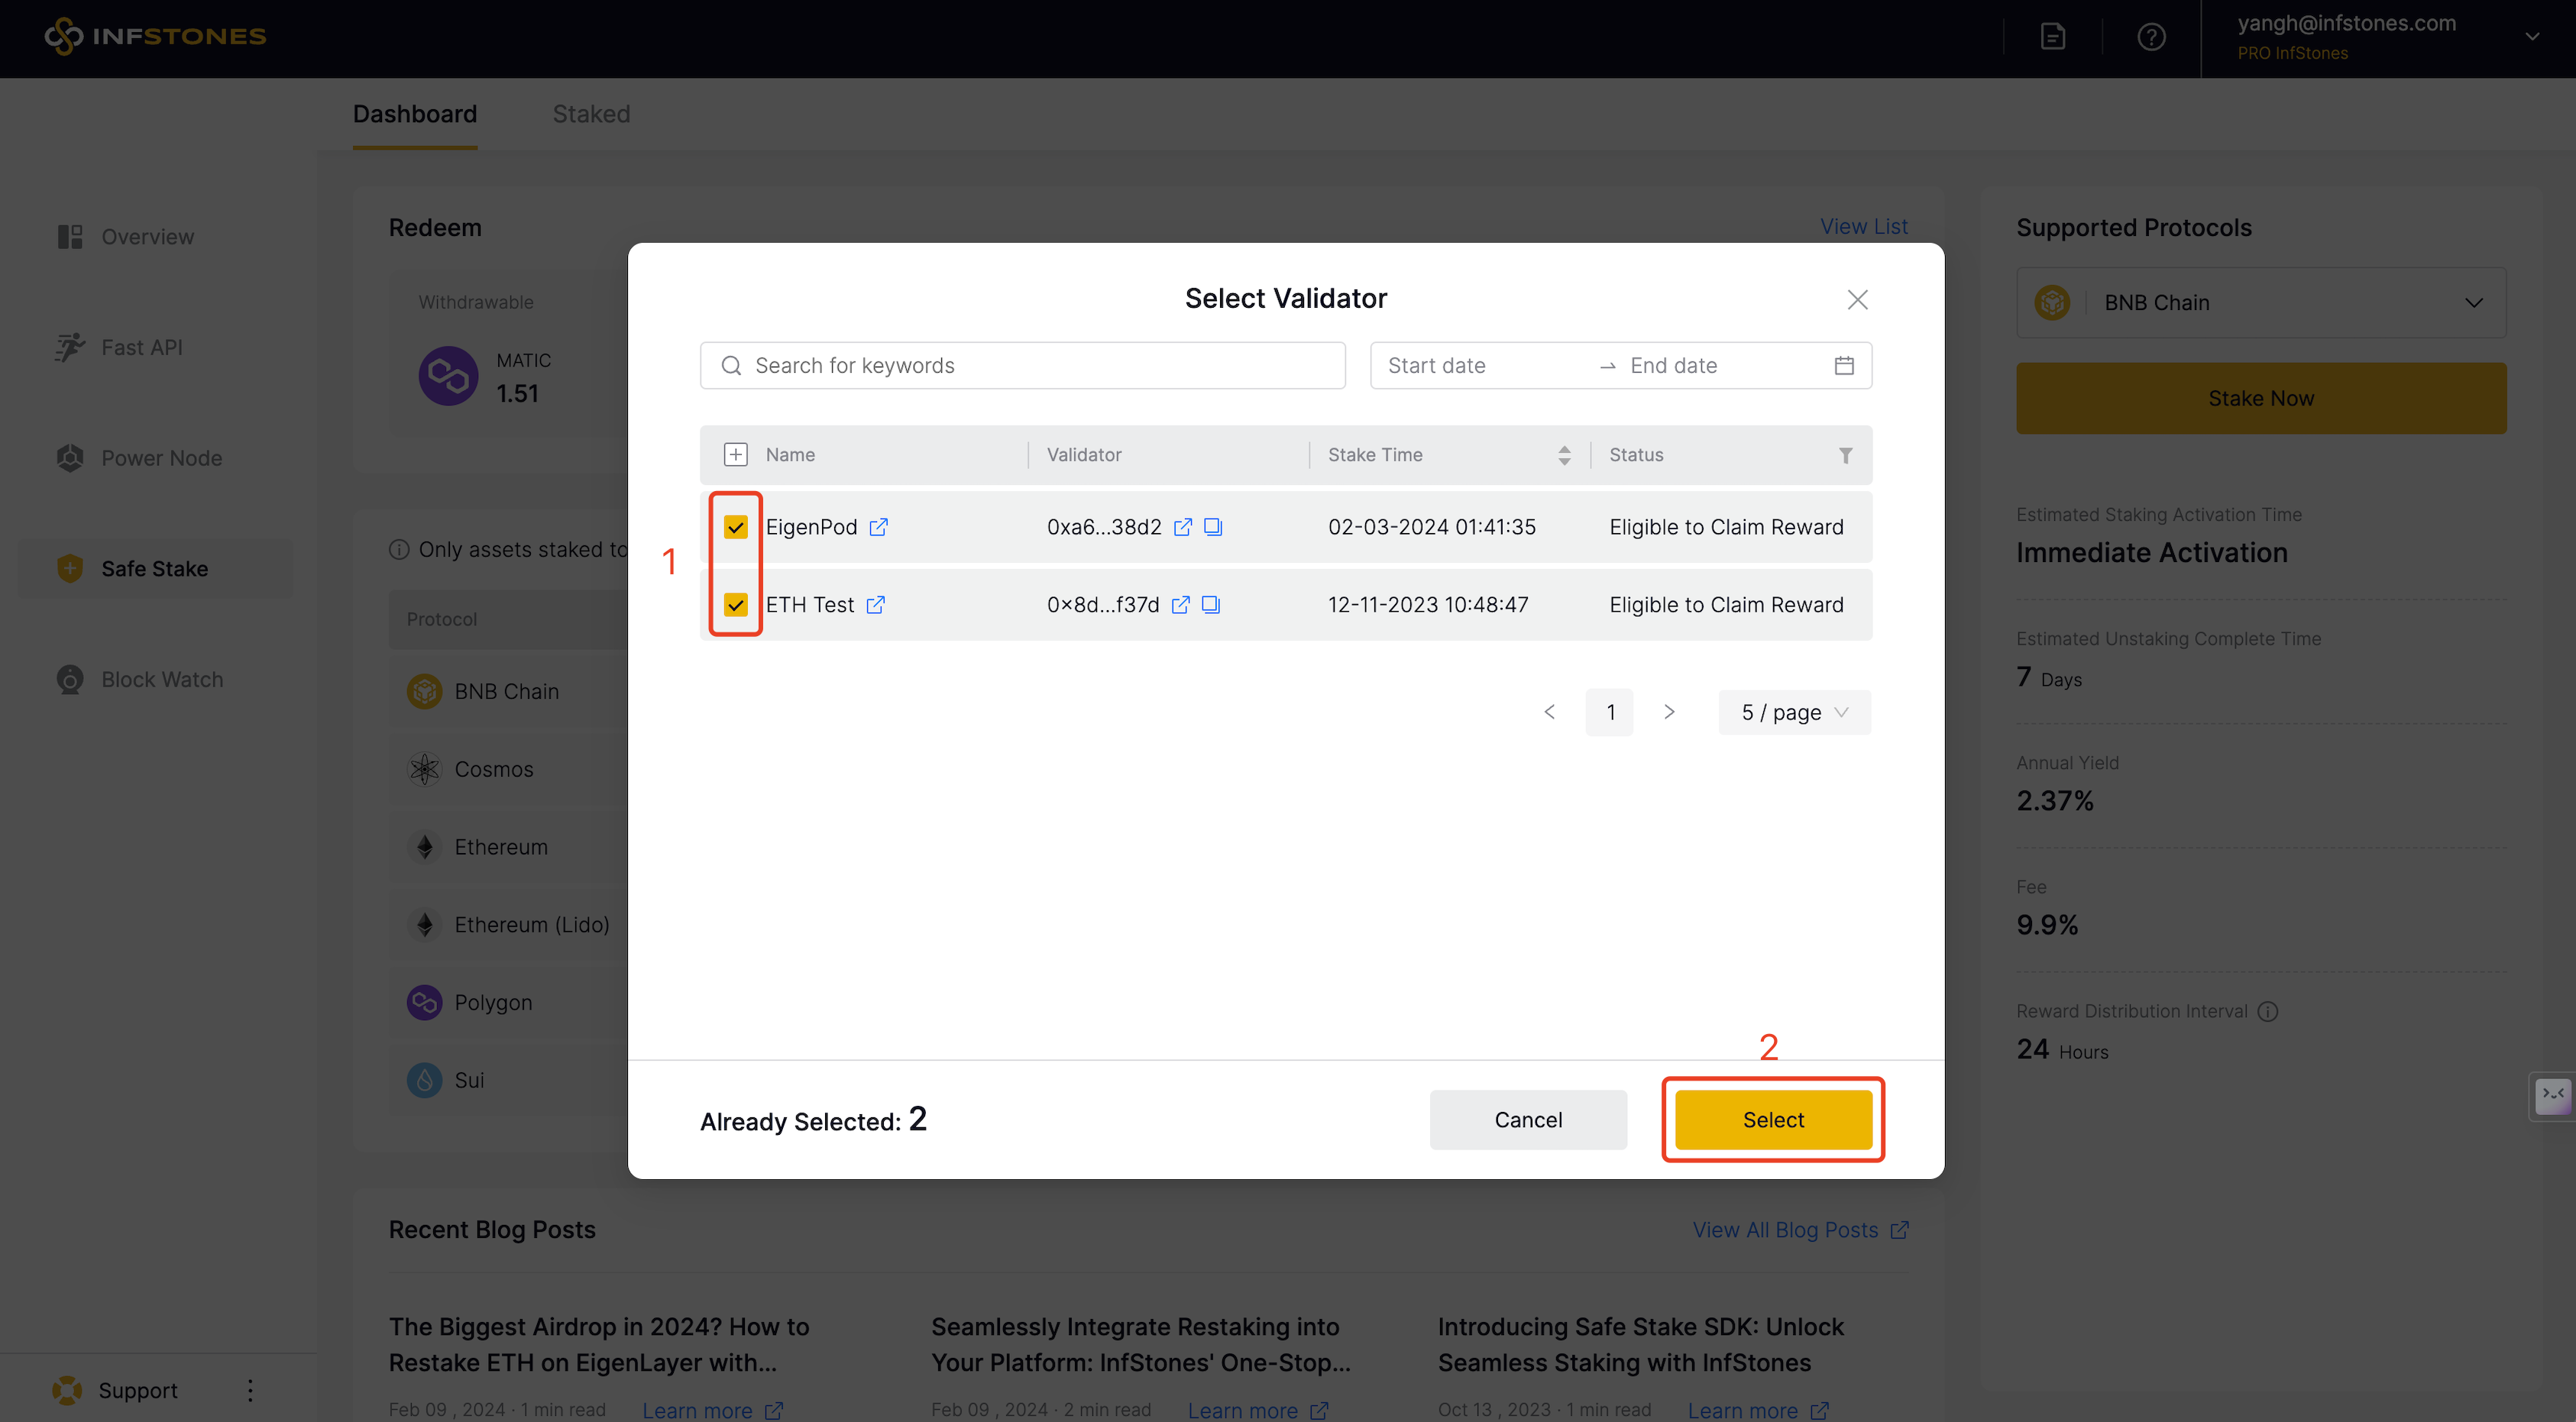 InfStones' Select Validator option allows you to claim rewards from multiple validators at one time